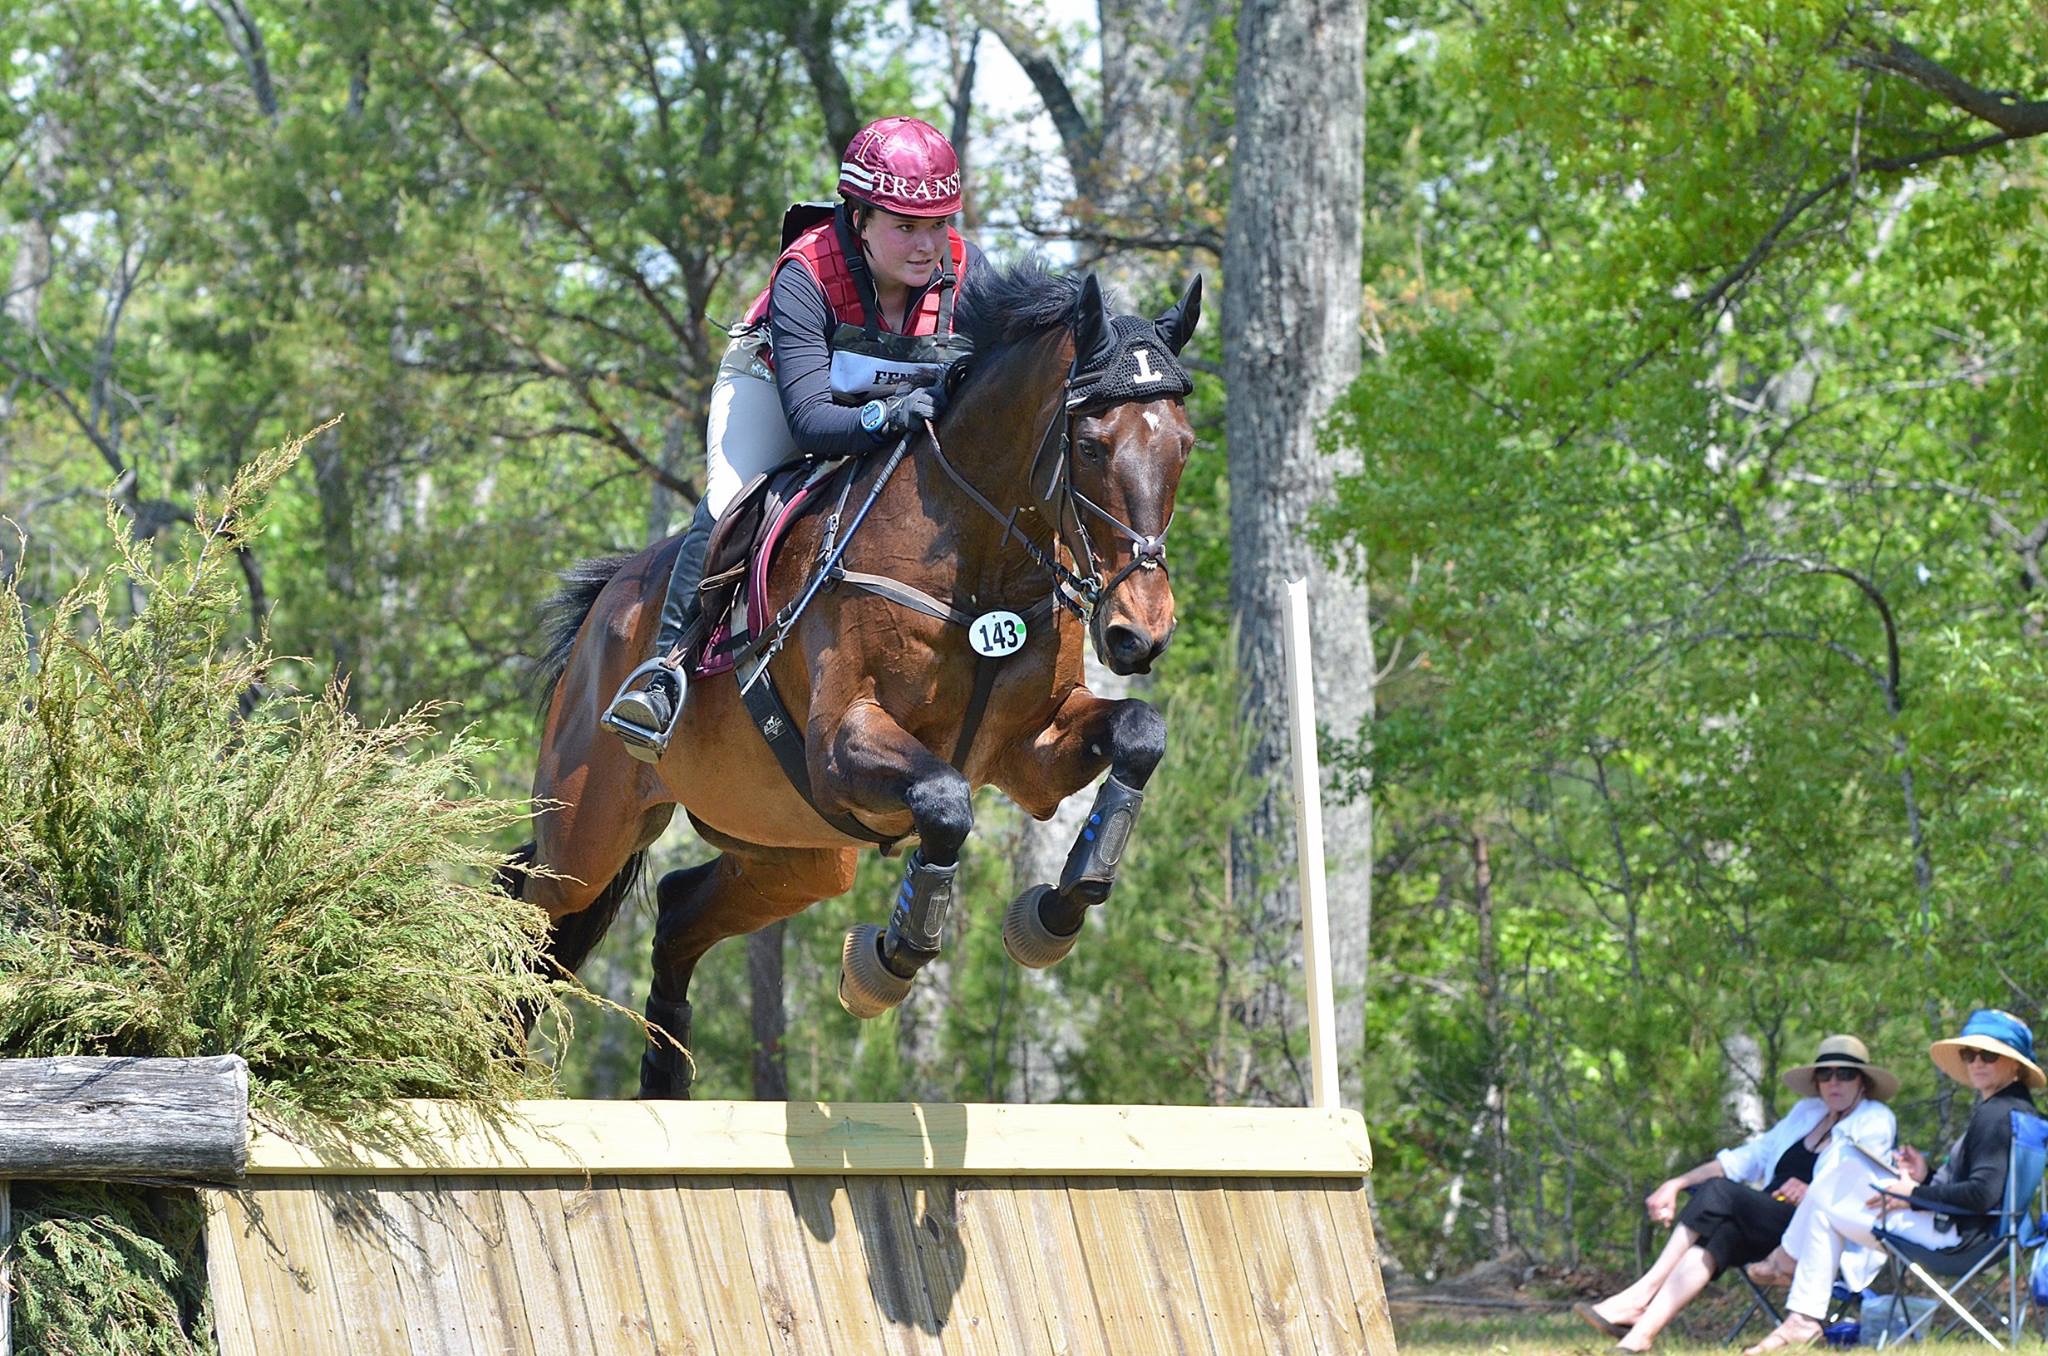 Transylvania equestrian first to jump into new pharmacy partnership with UK